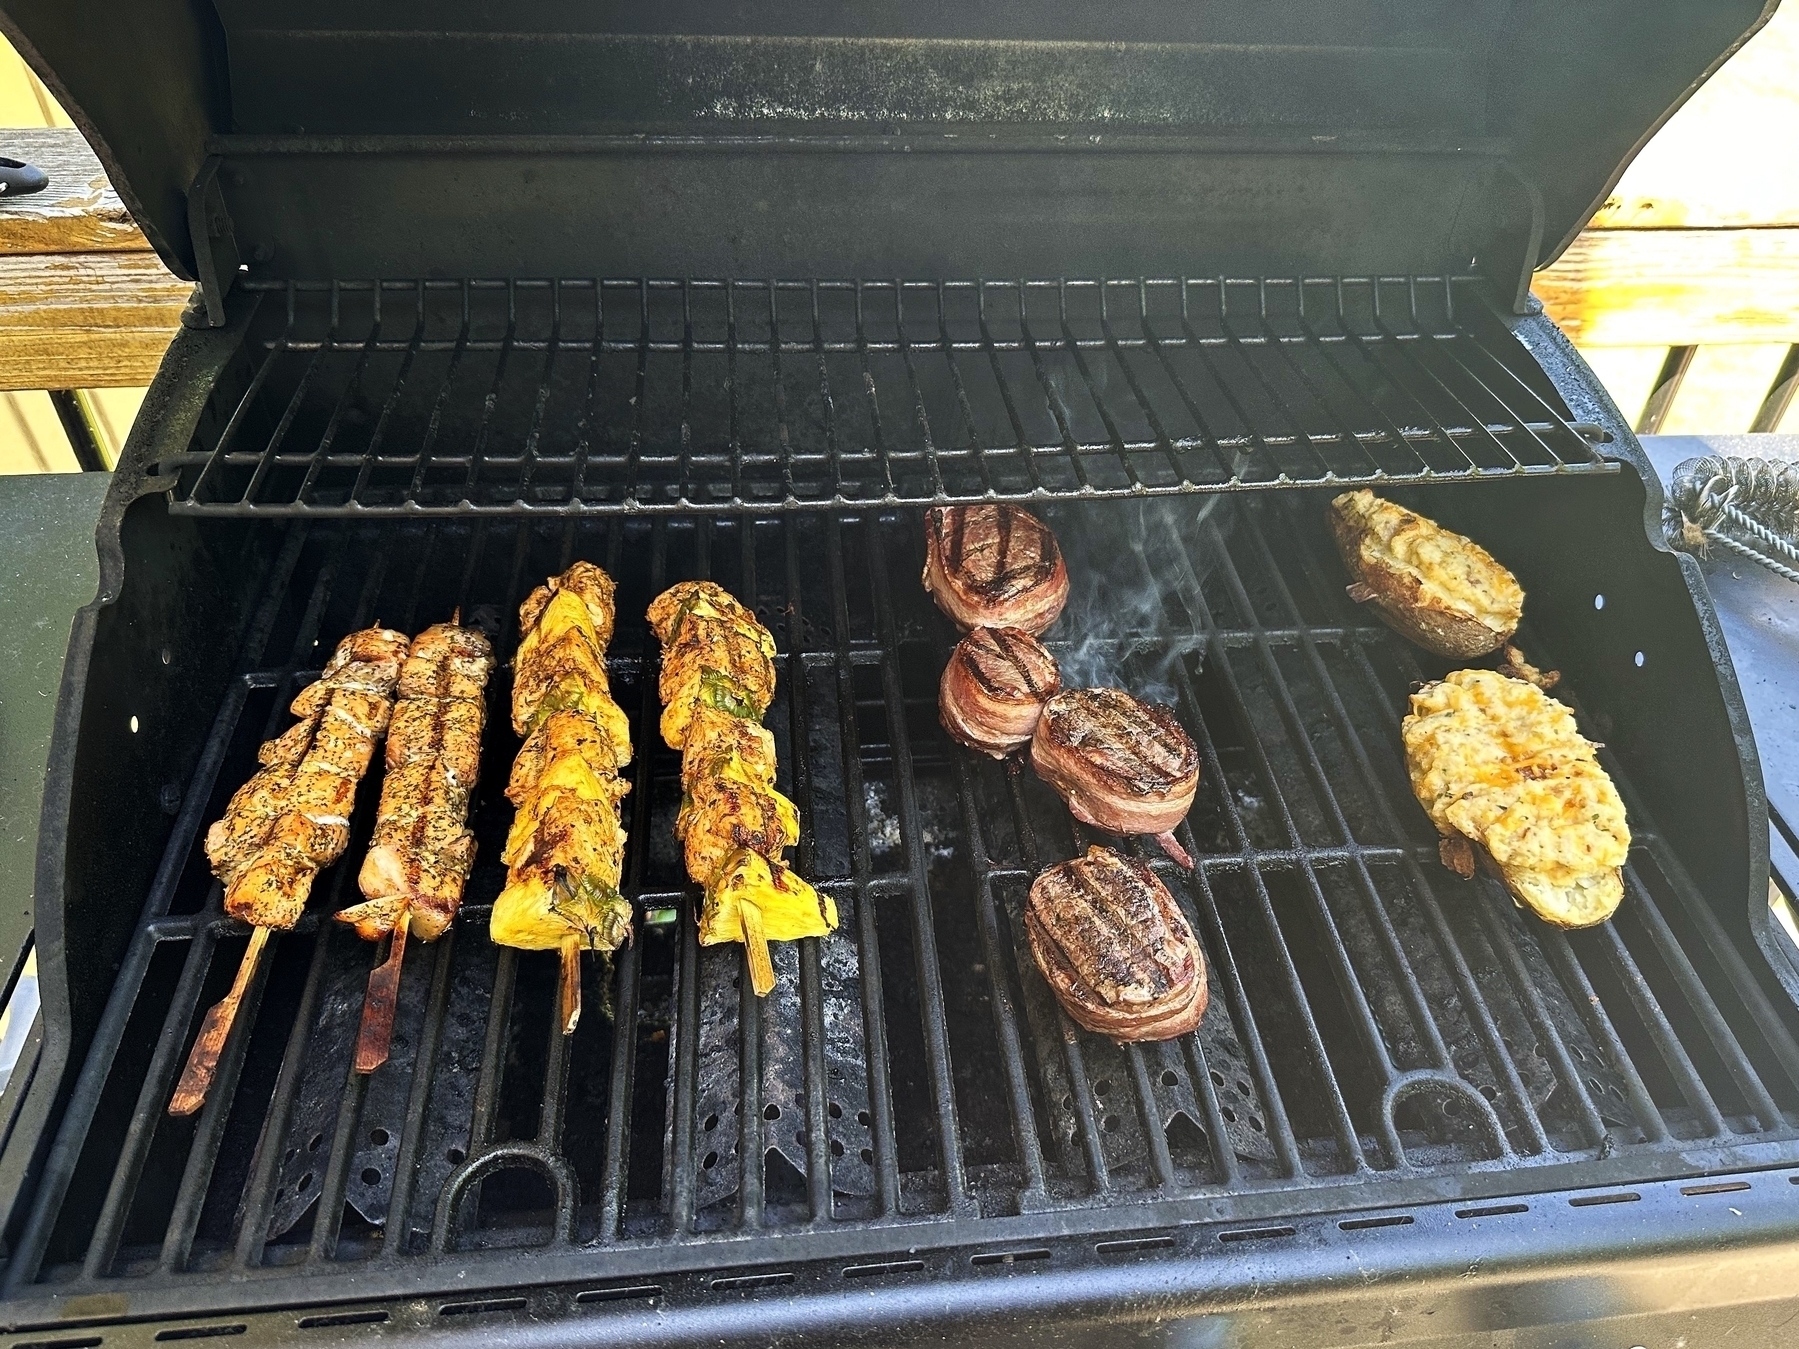 Various grilled foods are cooking on an open outdoor grill including skewered meat vegetable kebabs steak medallions wrapped in bacon and twice-baked potatoes